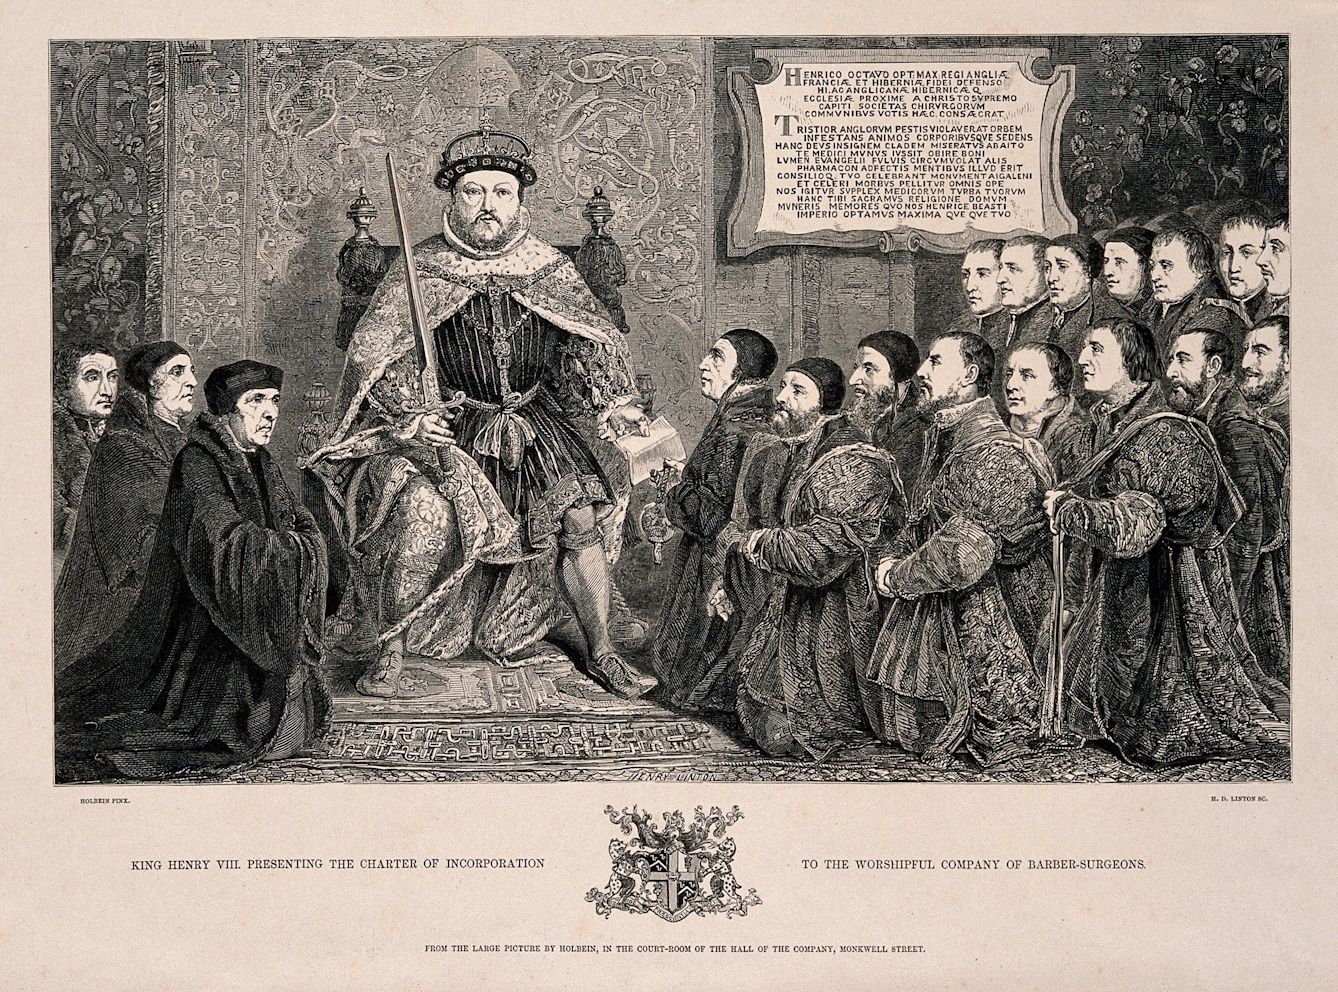 Wood engraving showing King Henry VIII granting a Royal charter to the Barber-Surgeons Company. The King is sat on his thrown, elevated from the other men. He holds a sword in one hand, and in the other there is a piece of piece he hands to a man to his left. 